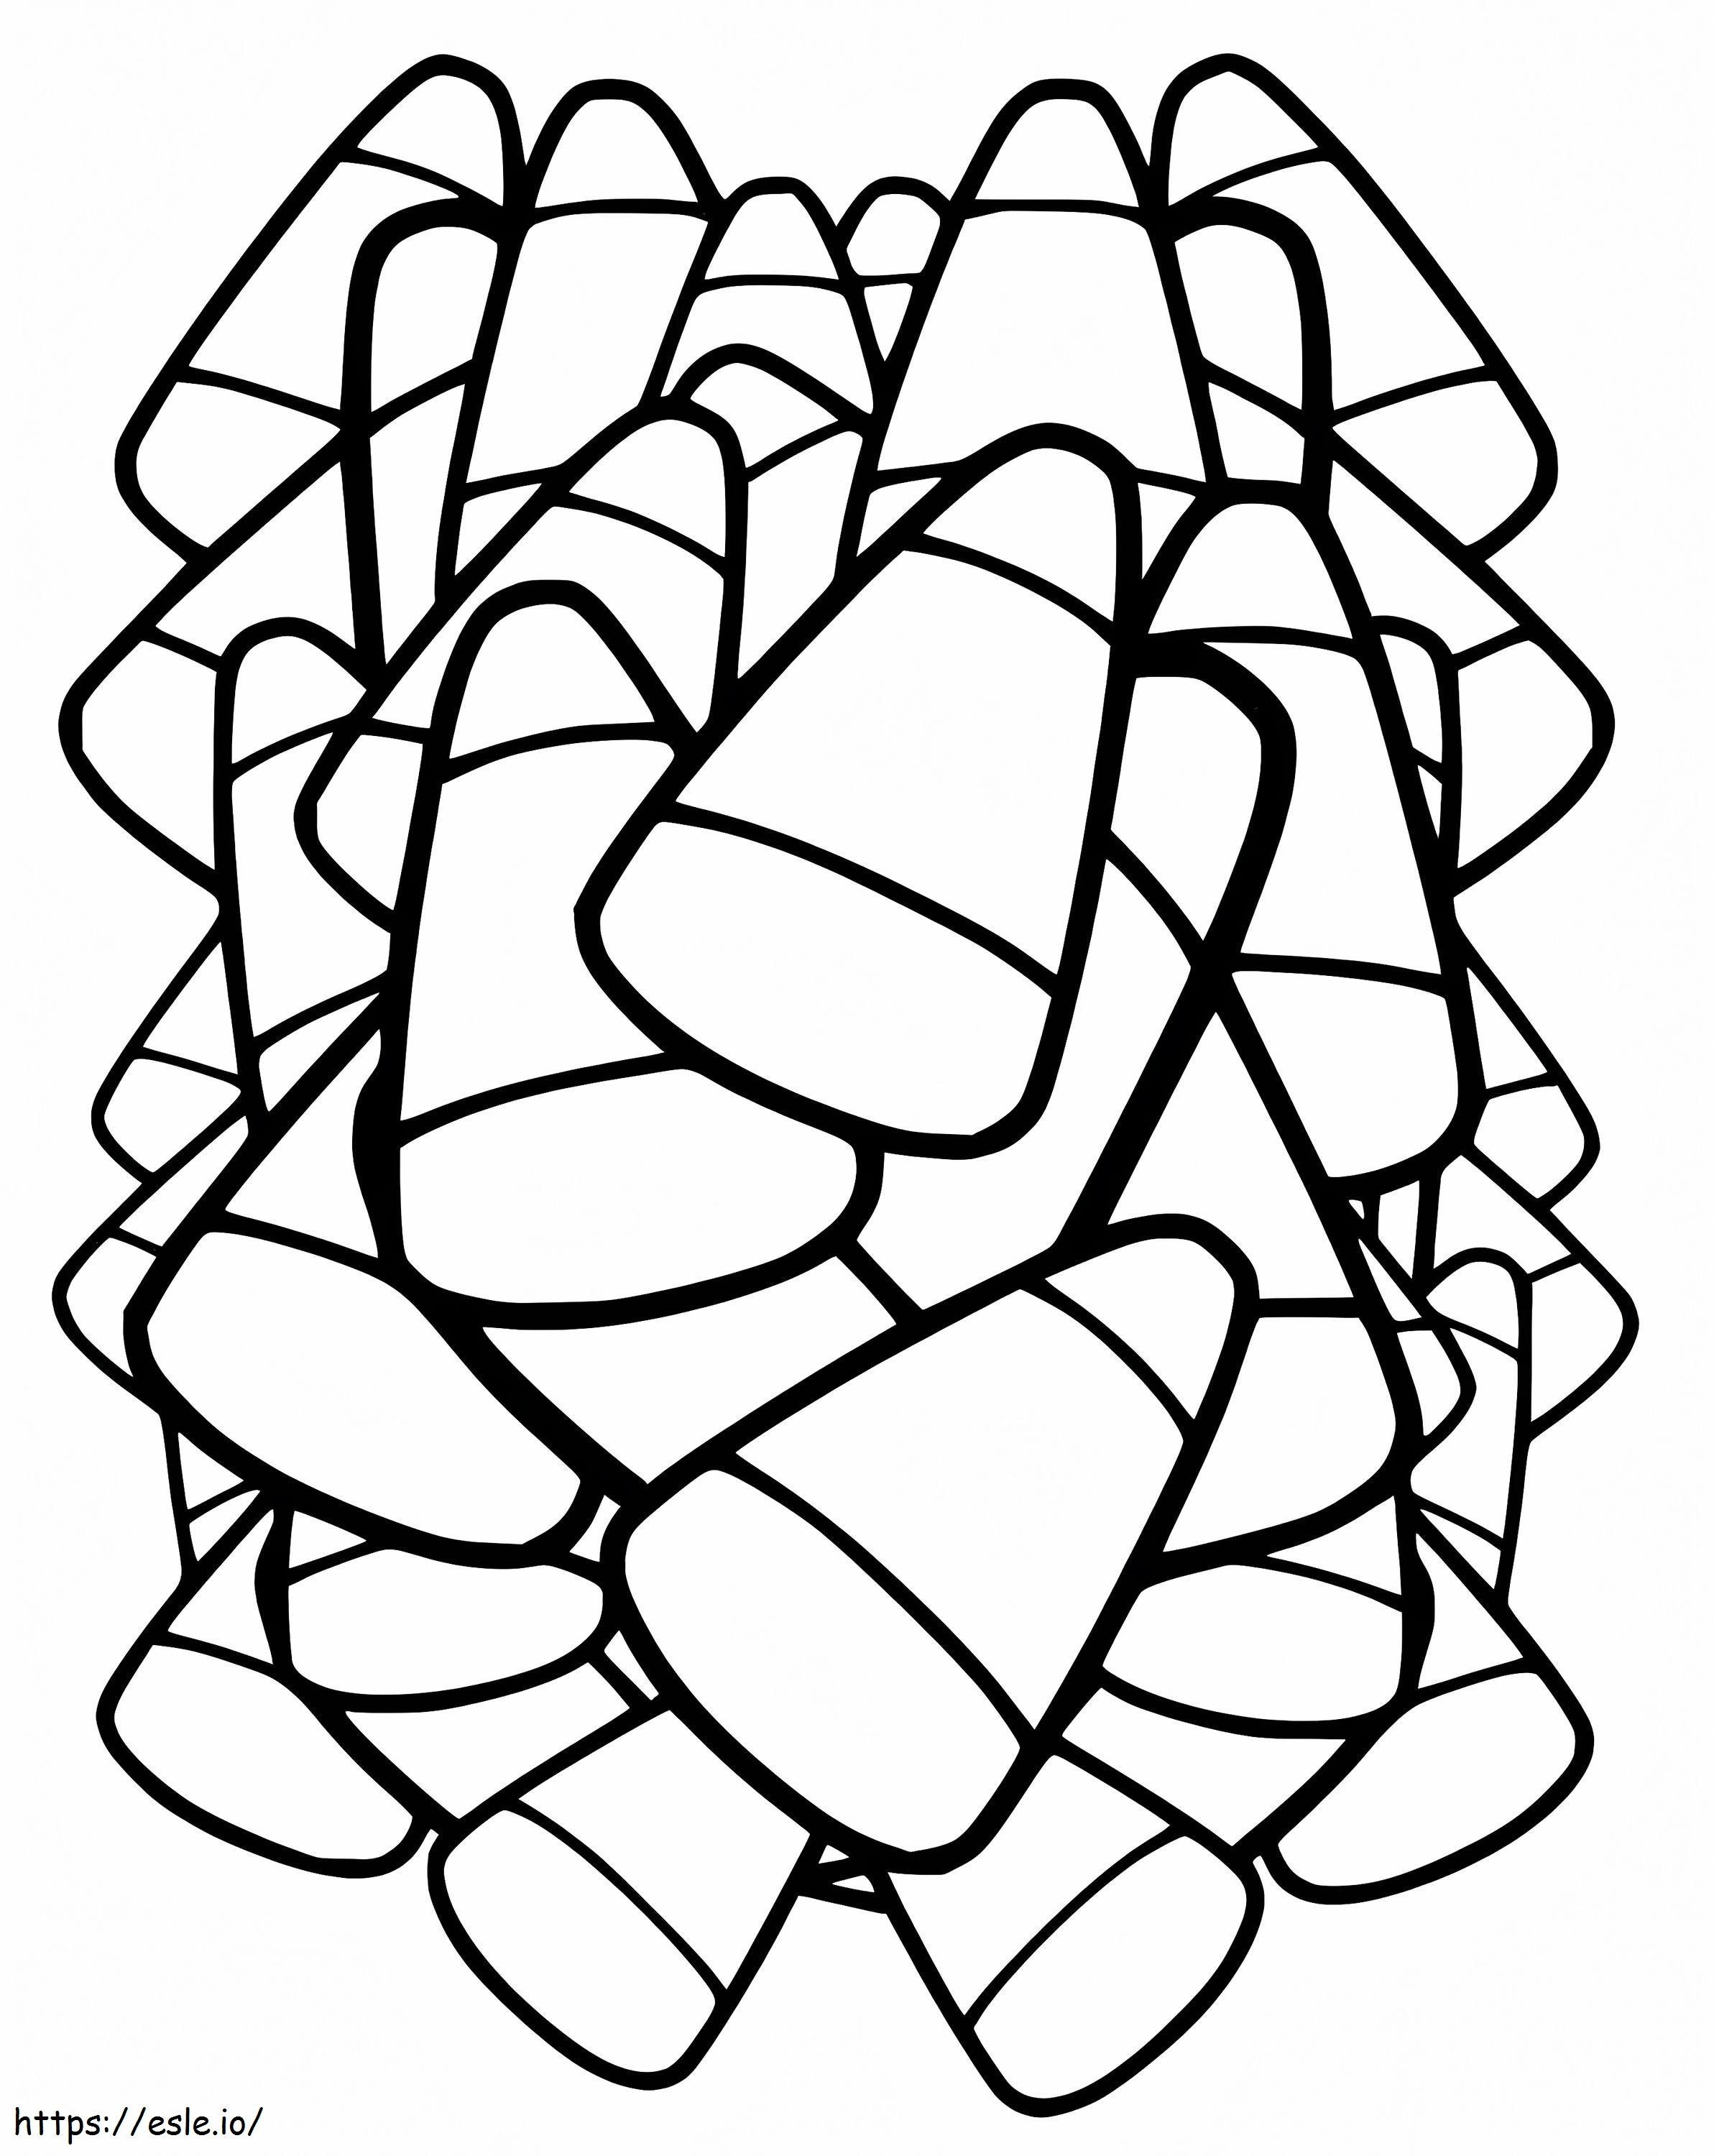 Printable Candy Corn coloring page